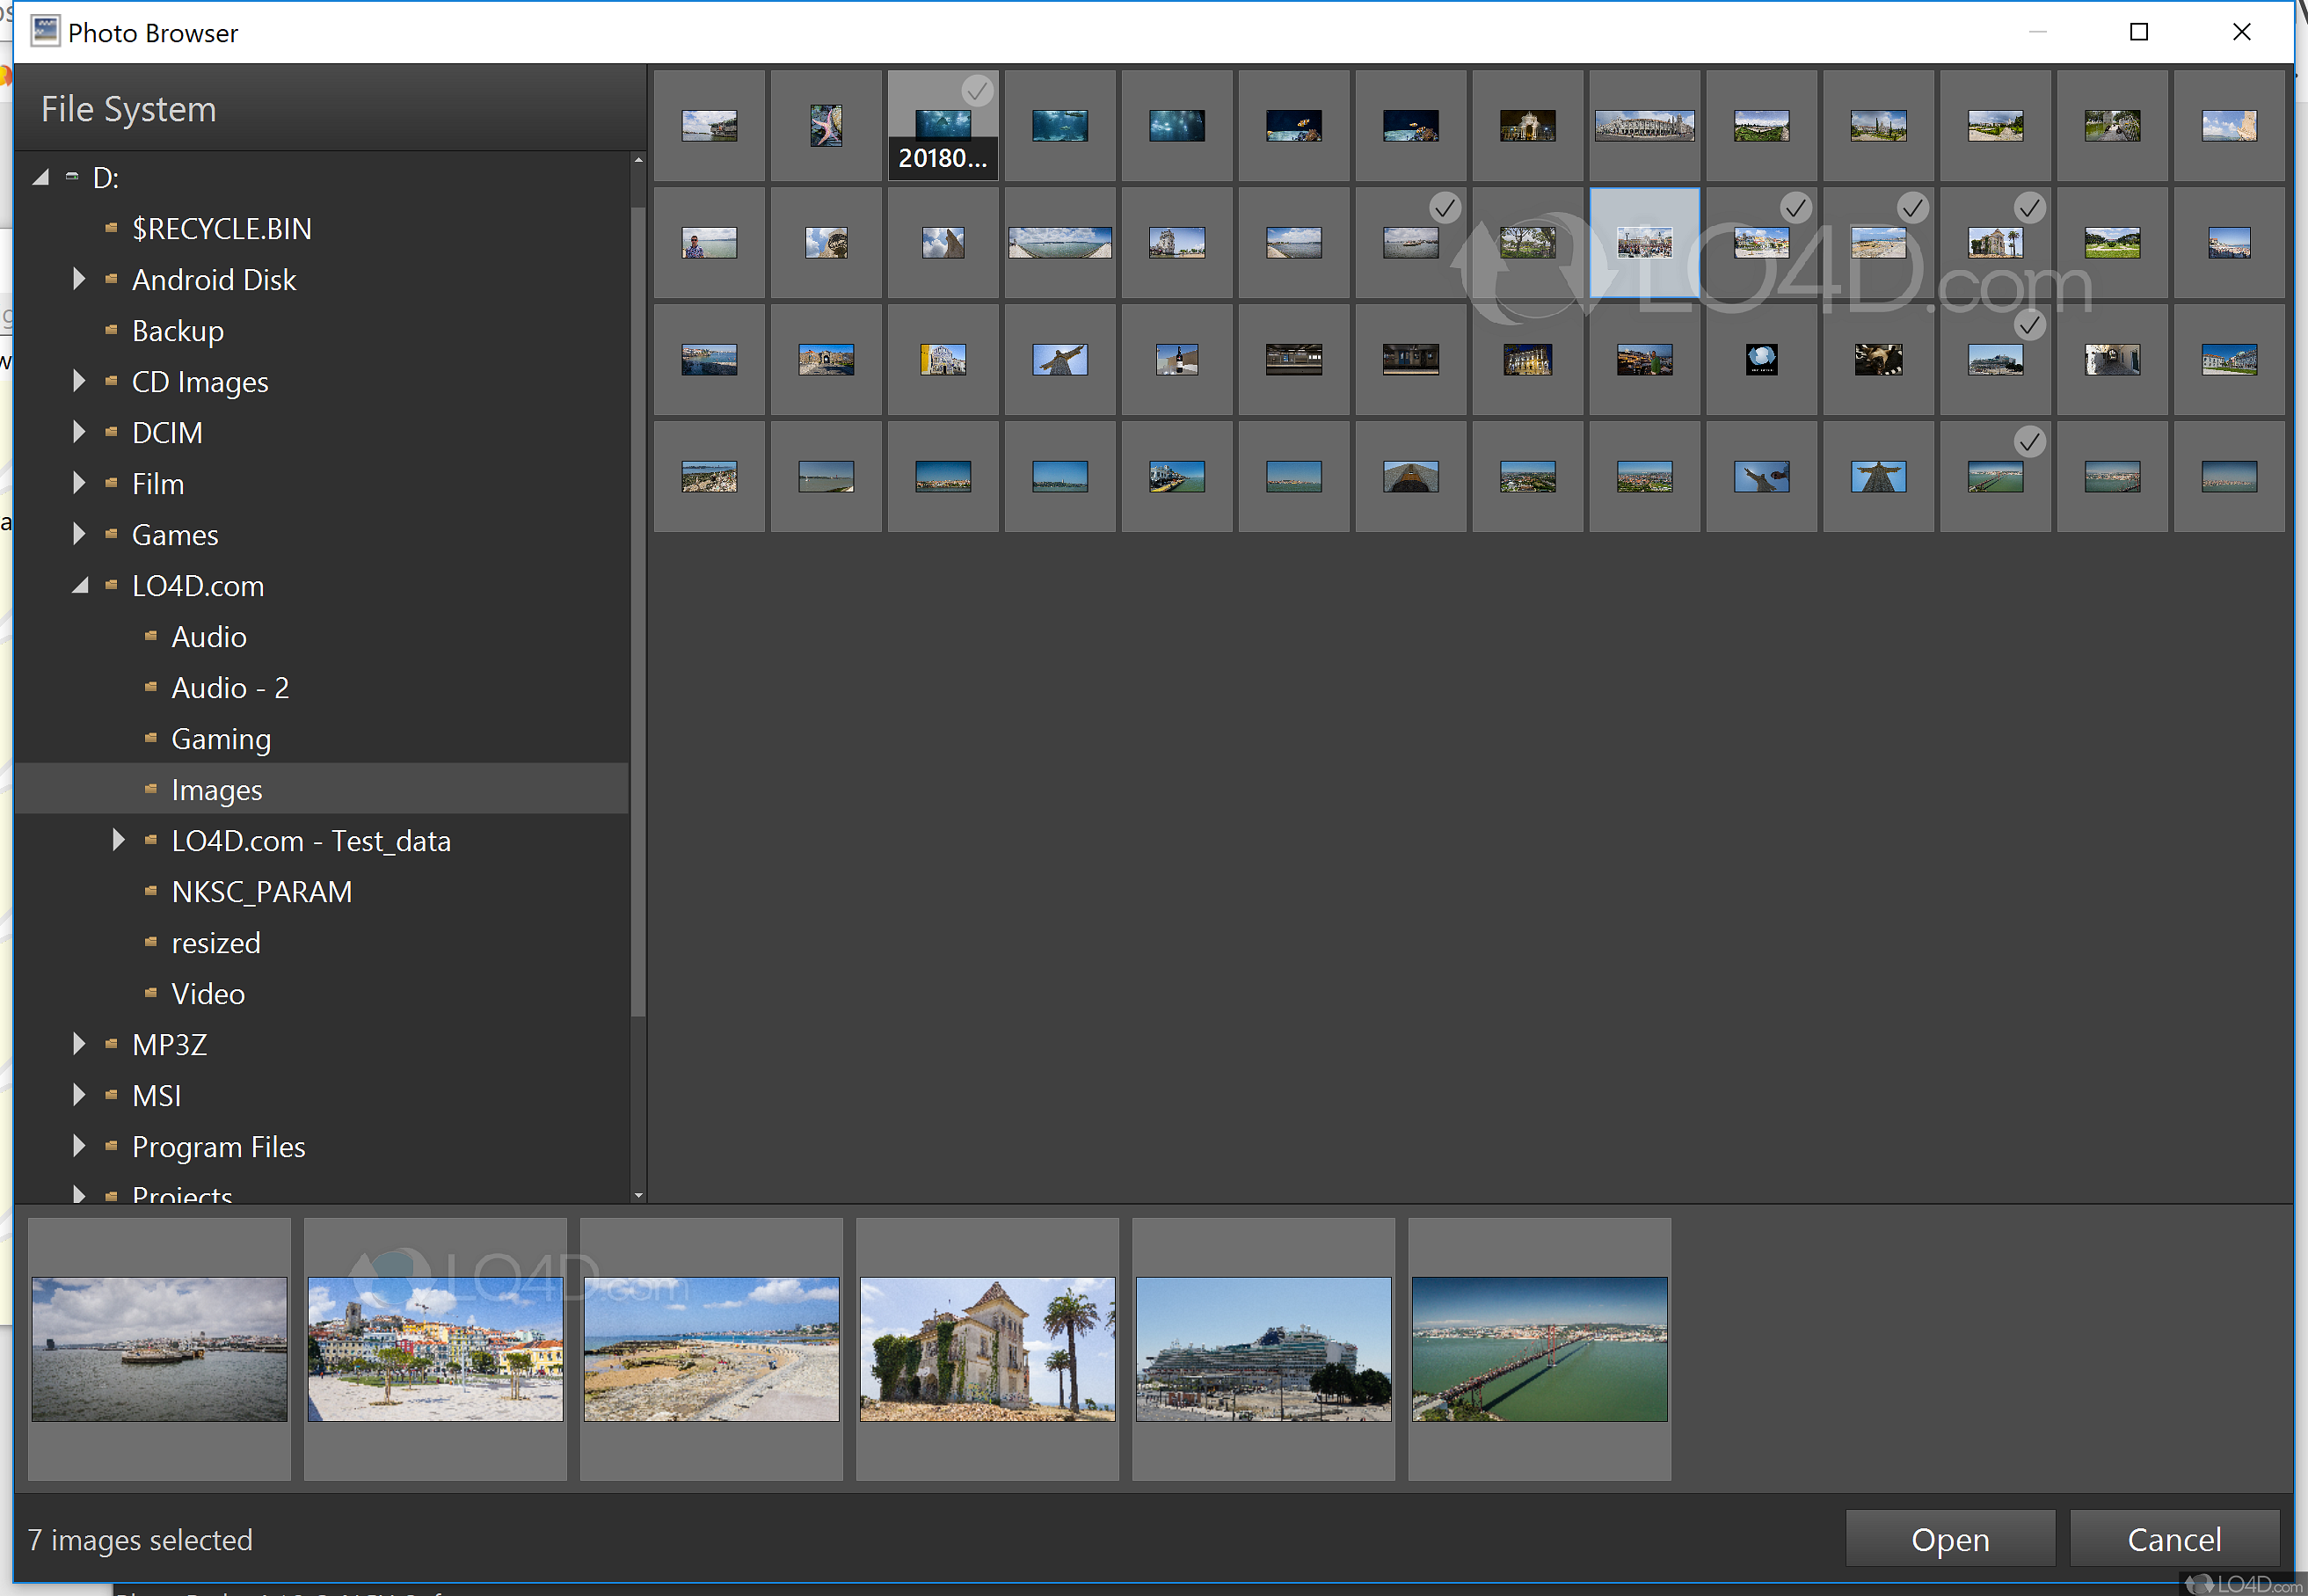 download the new NCH PhotoPad Image Editor 11.51